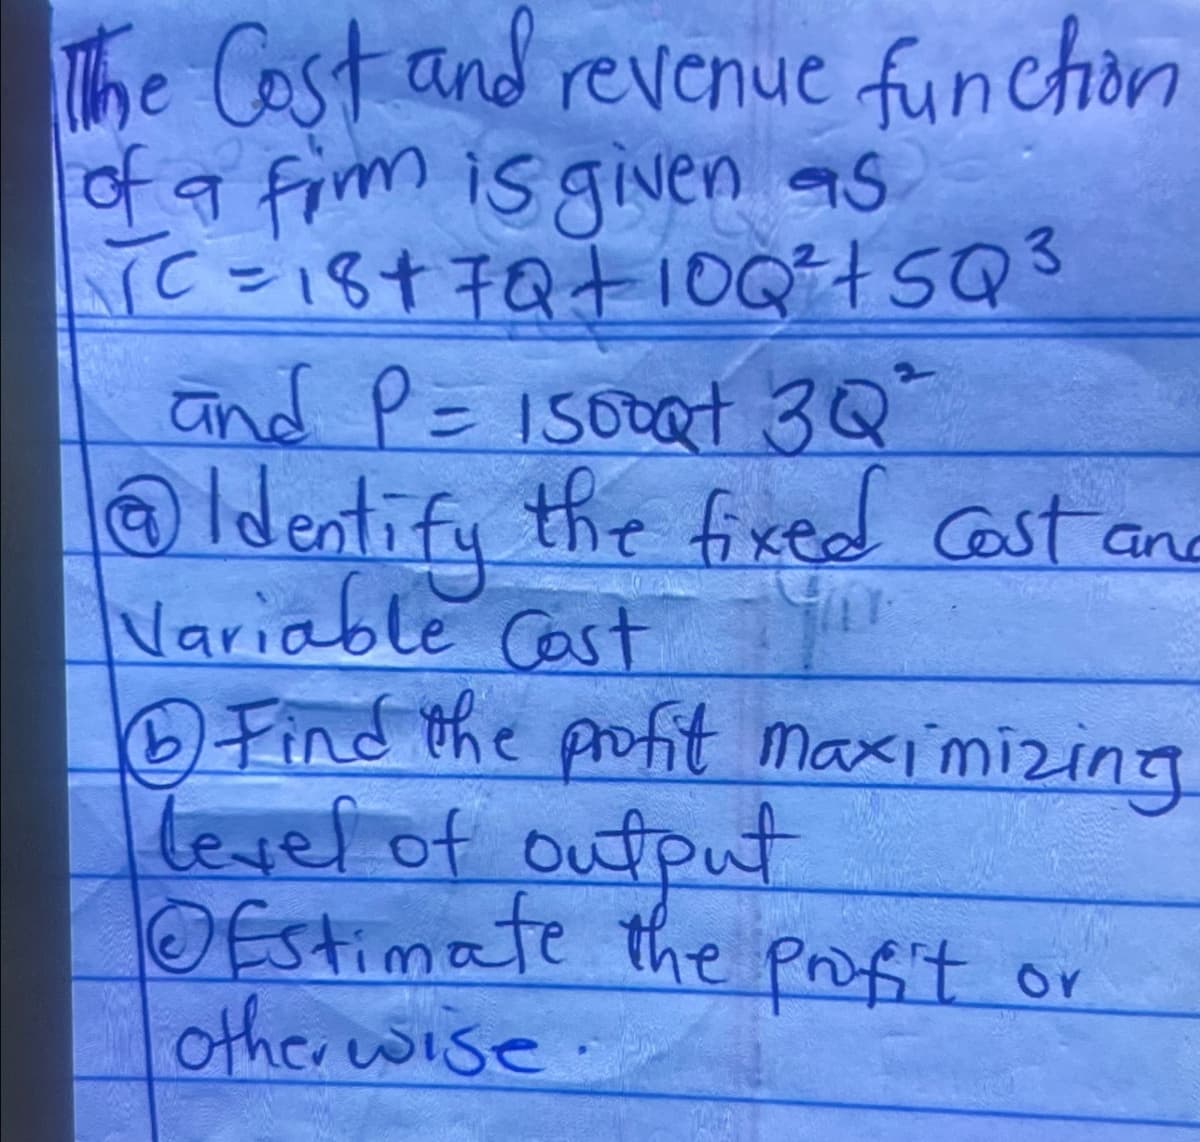 The Cost and revenue funchon
of a firm is given as
C=18+7Q+ 10 Q² + SQ 3
and P = 15000+ 3Q"
@Identify the fixed cost an
Variable Cost T
6 Find the profit maximizing
level of output
⑥Estimate the profit or
otherwise